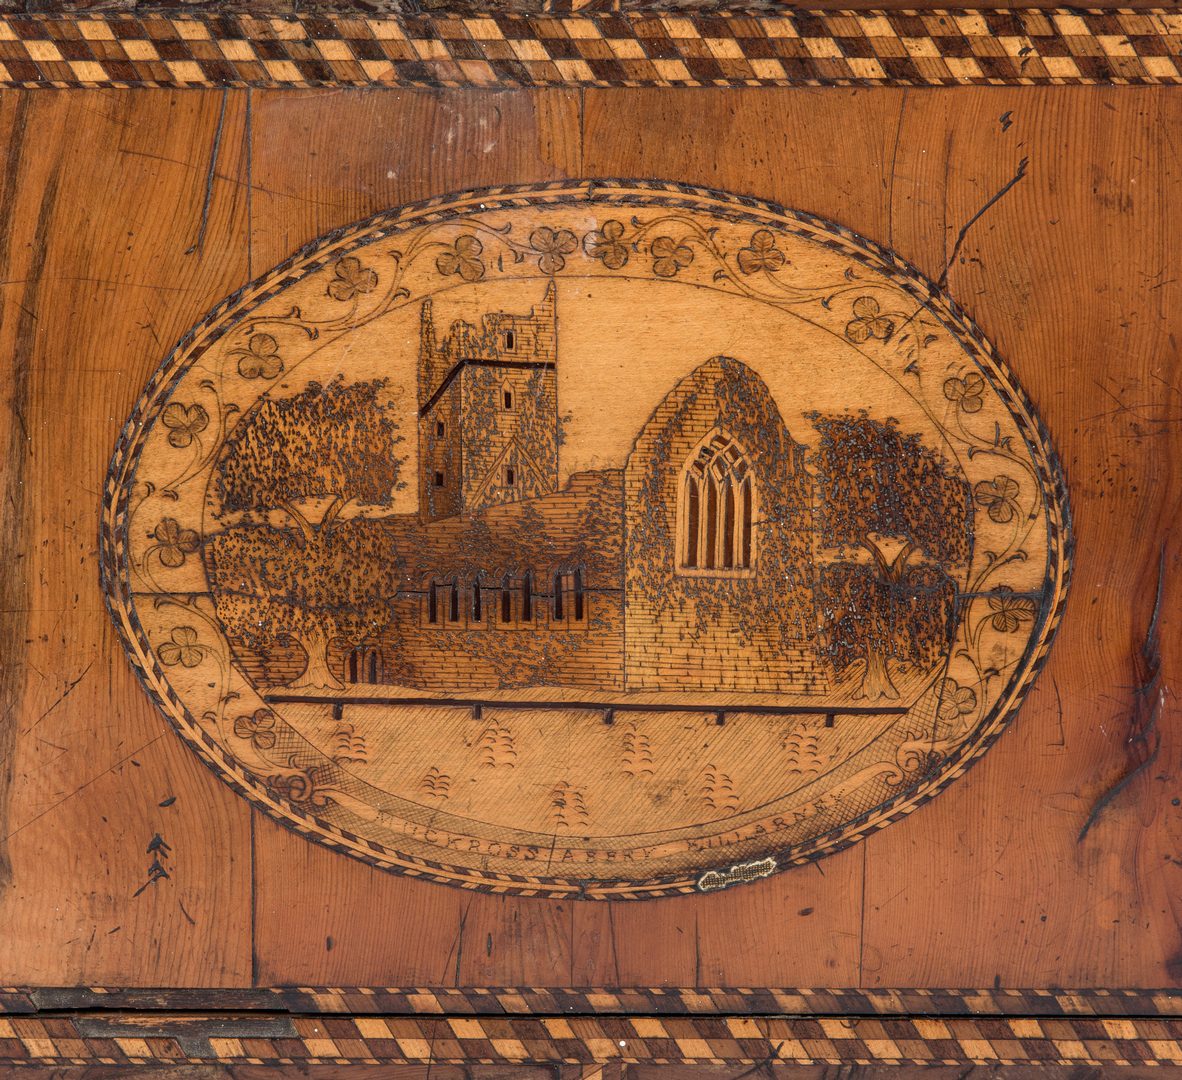 Lot 163: Killearney, Ireland Inlaid Game Table